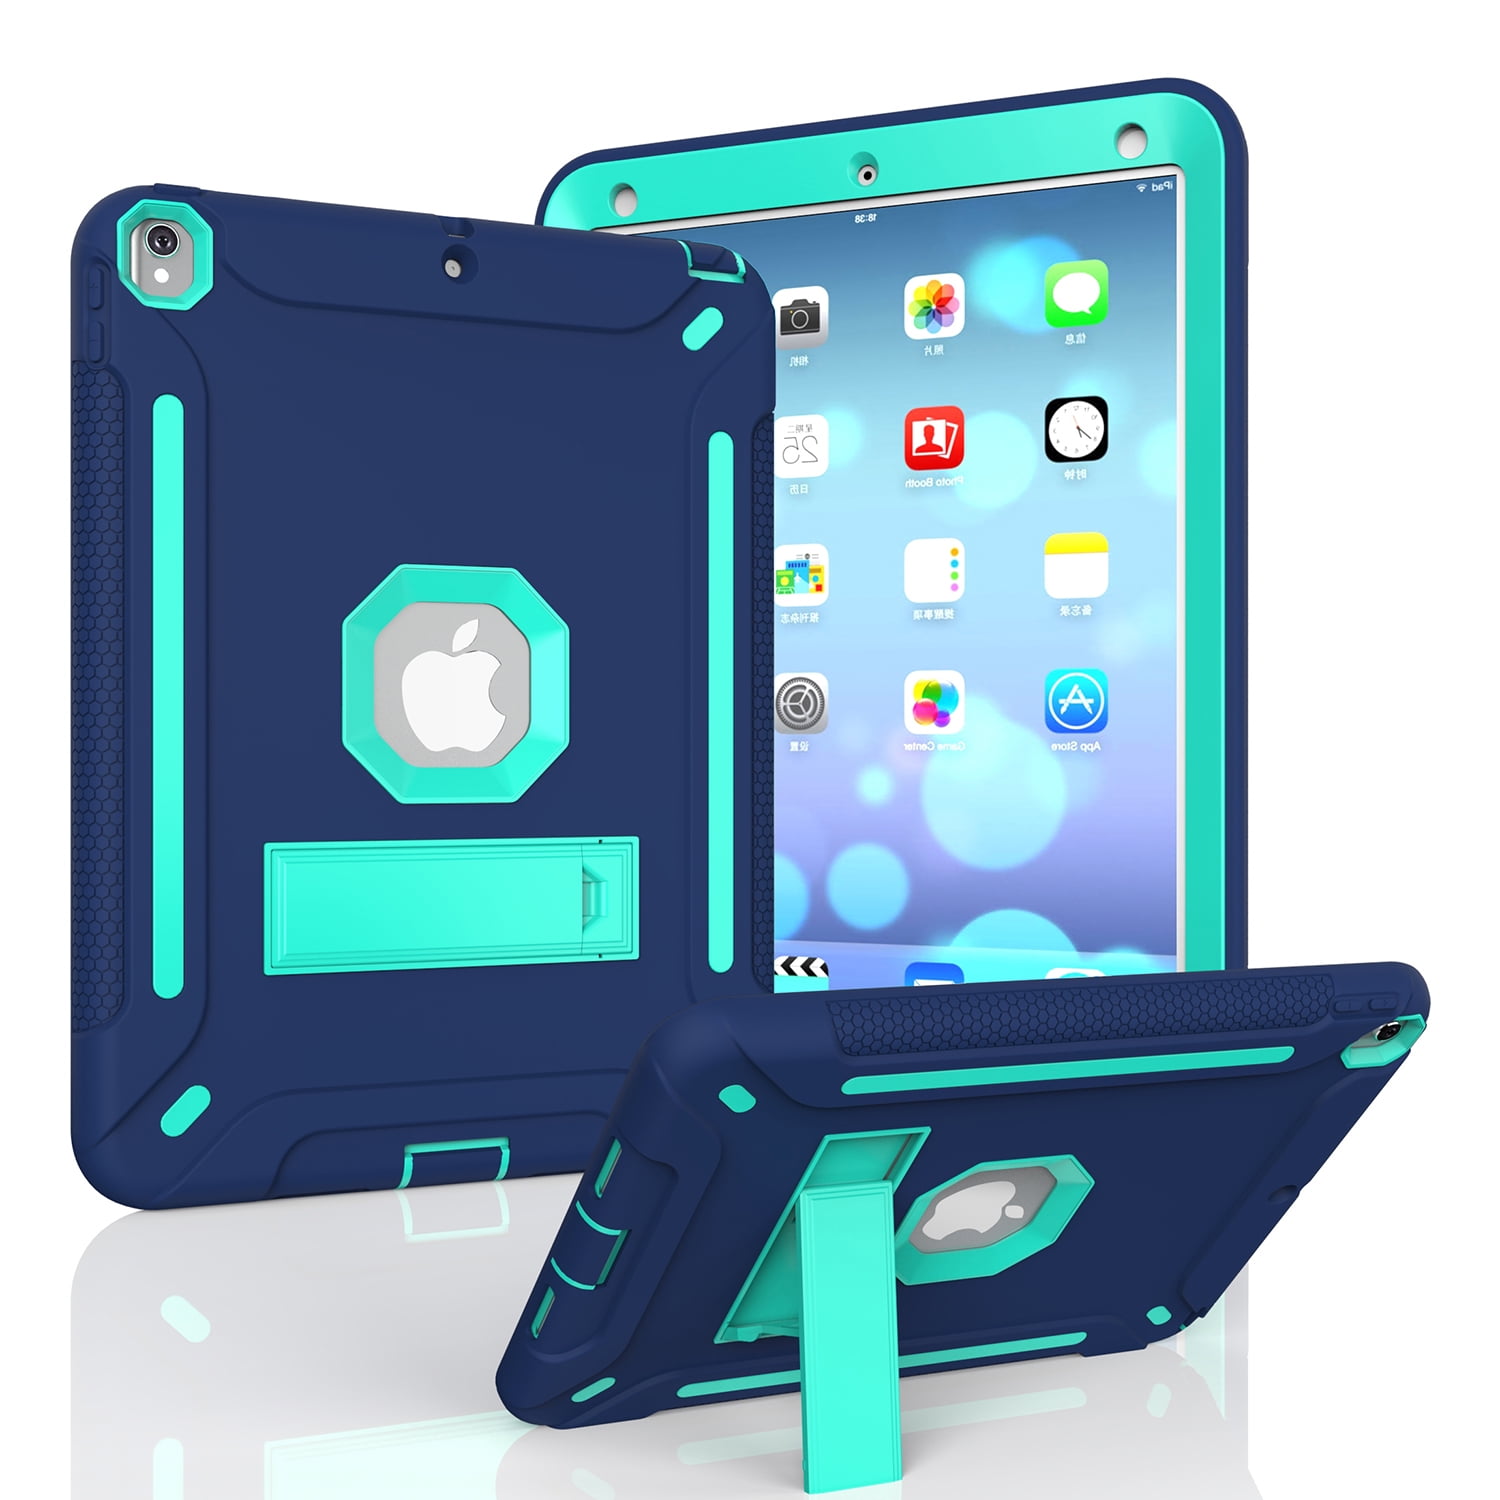 9.7 inch Protective Shock Proof & Kid Friendly iPad Air Case Generations 1 & 2 